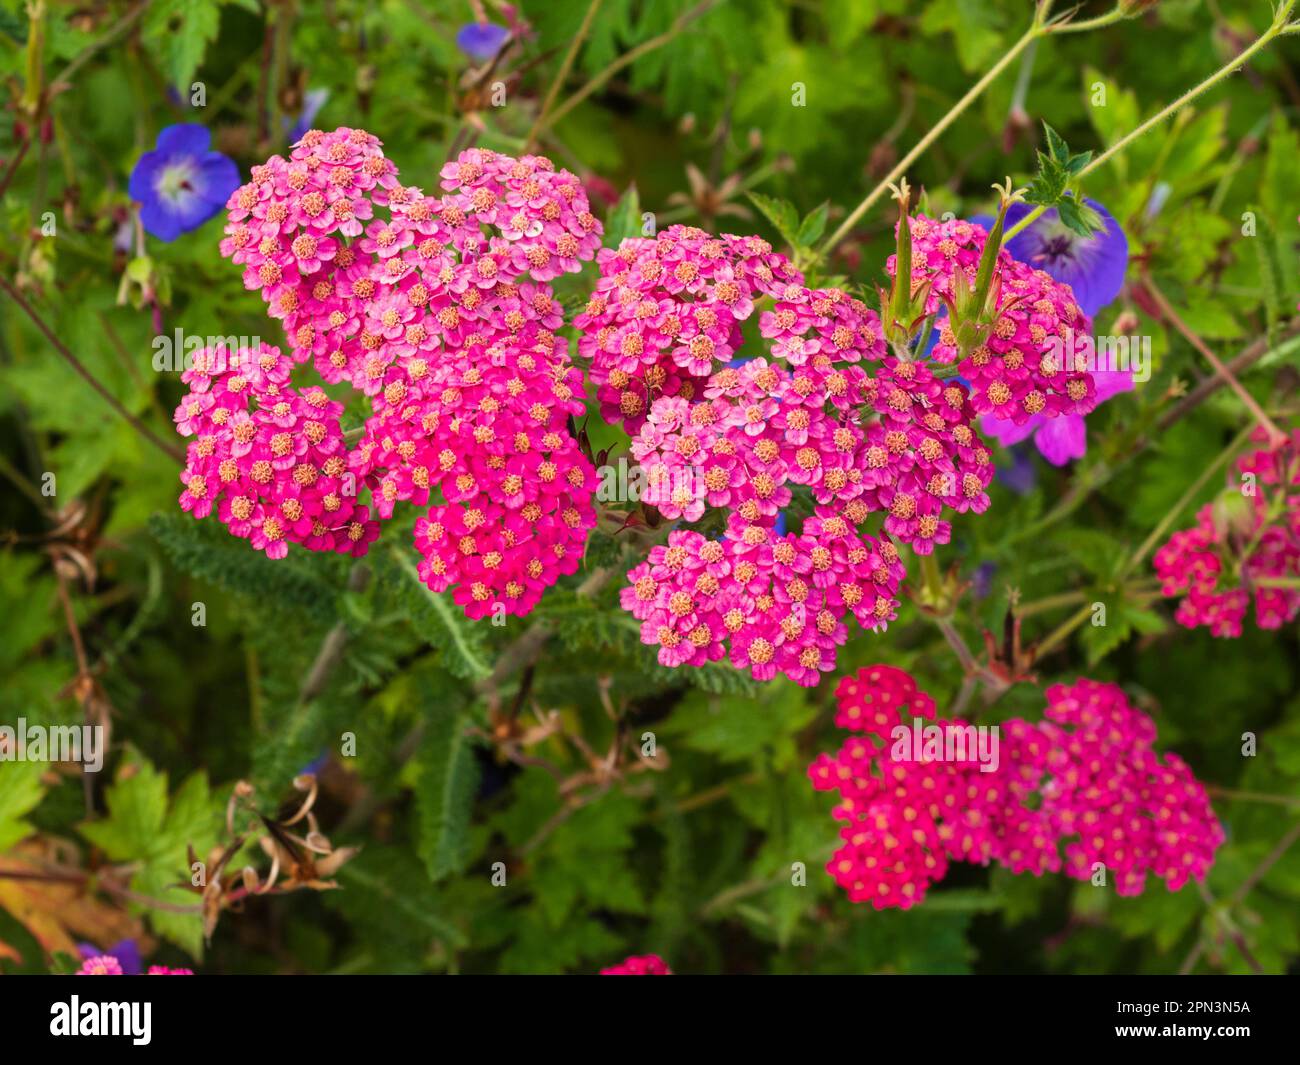 Pink blooms in the flower heads of the hardy perennial yarrow, Achille millefolium 'Paprika' Stock Photo